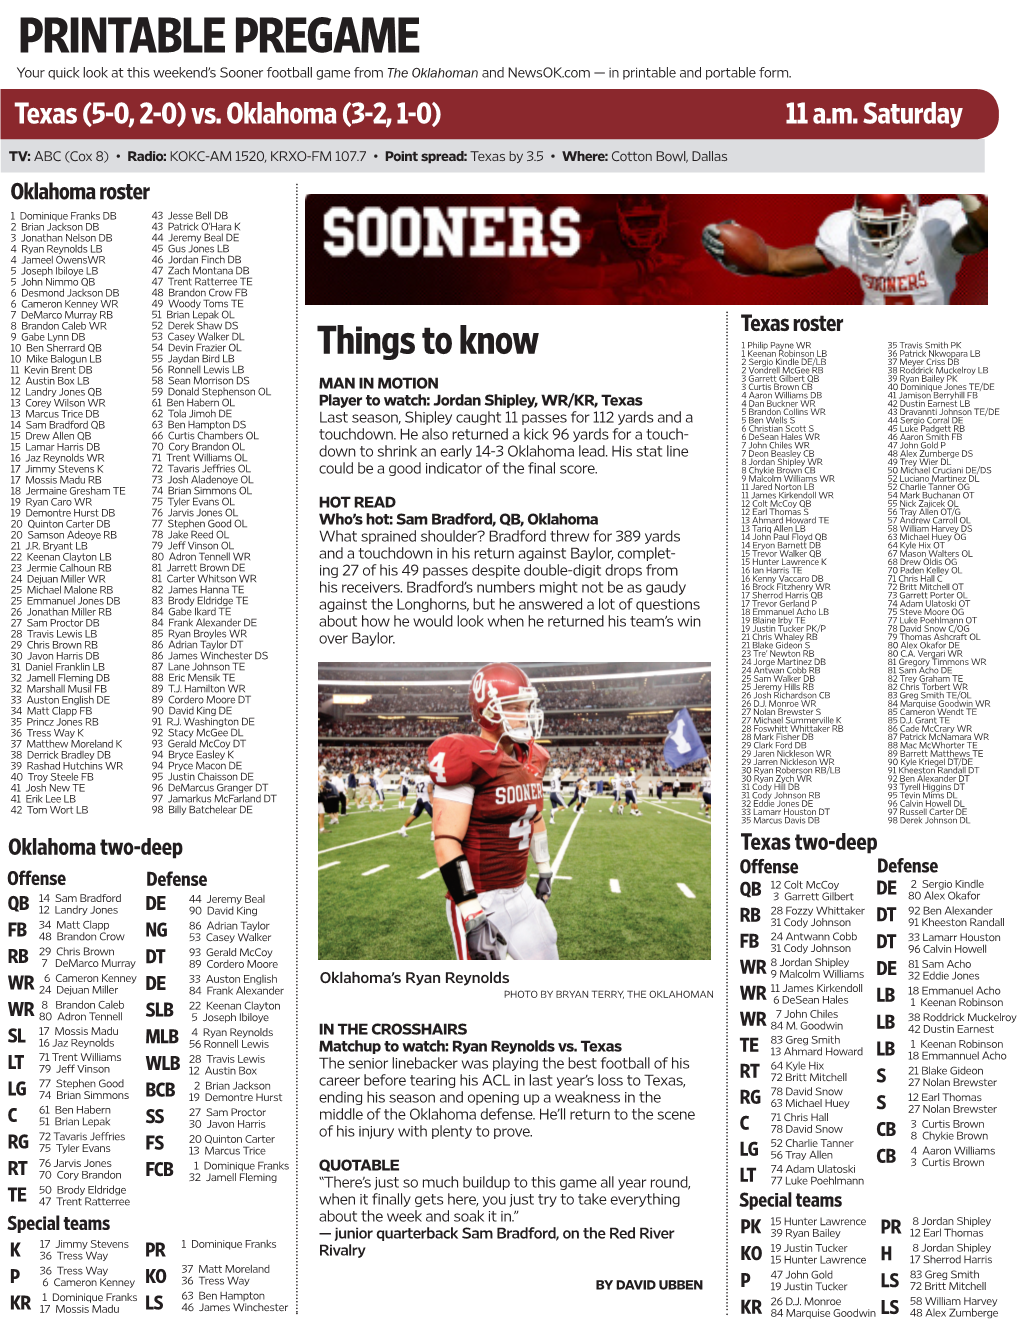 PRINTABLE PREGAME Your Quick Look at This Weekend’S Sooner Football Game from the Oklahoman and Newsok.Com —­ in Printable and Portable Form